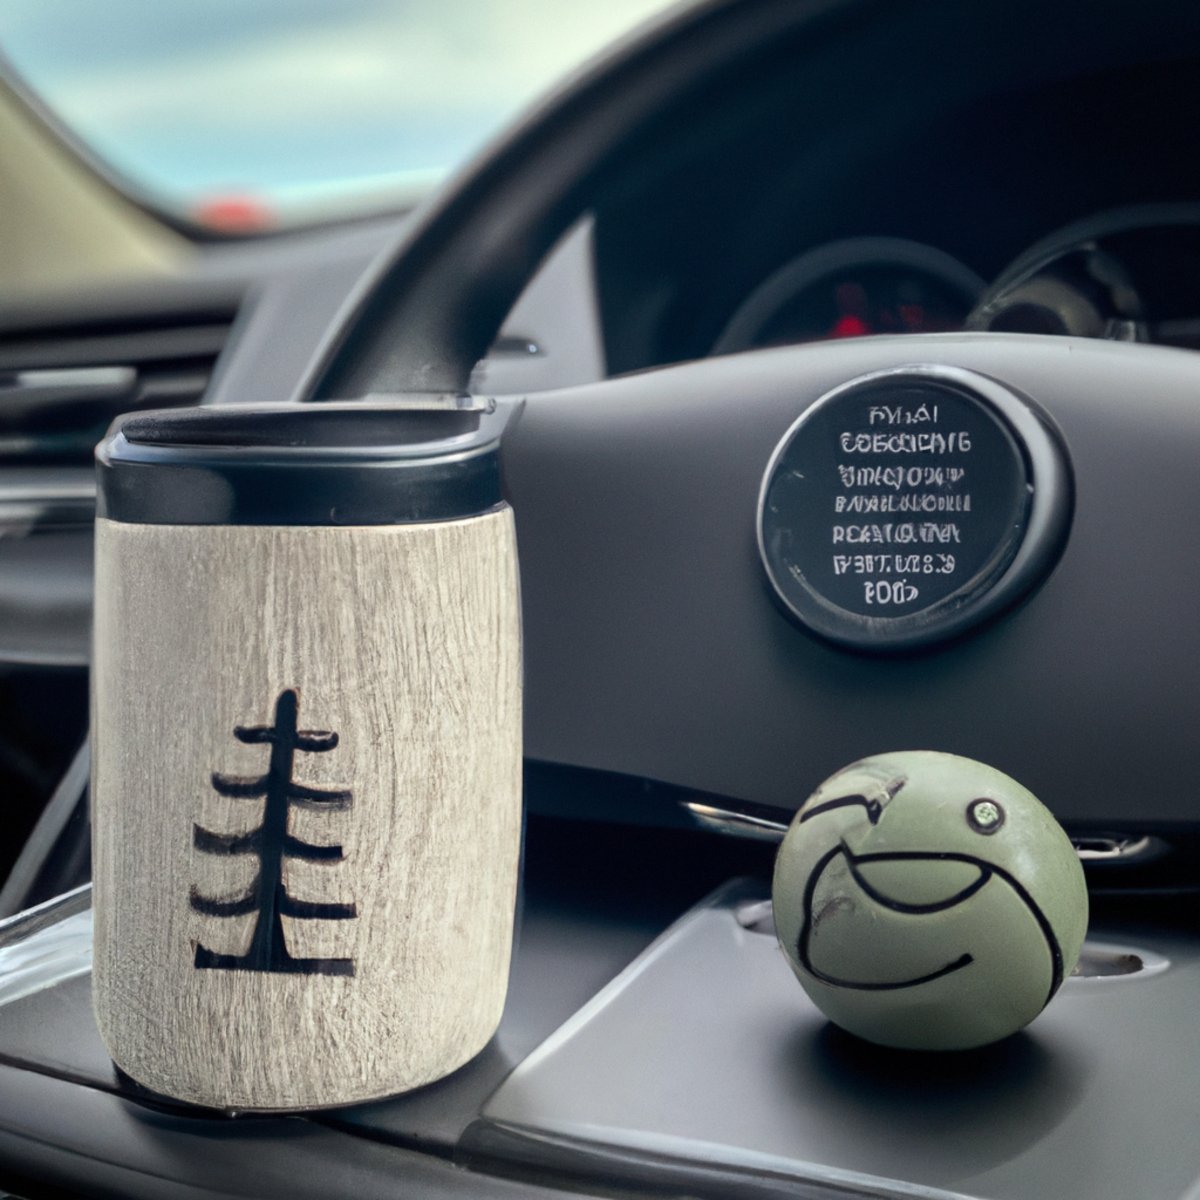 Commuter dashboard with coffee, stress ball, and essential oil diffuser - effective stress management strategies for busy highways.